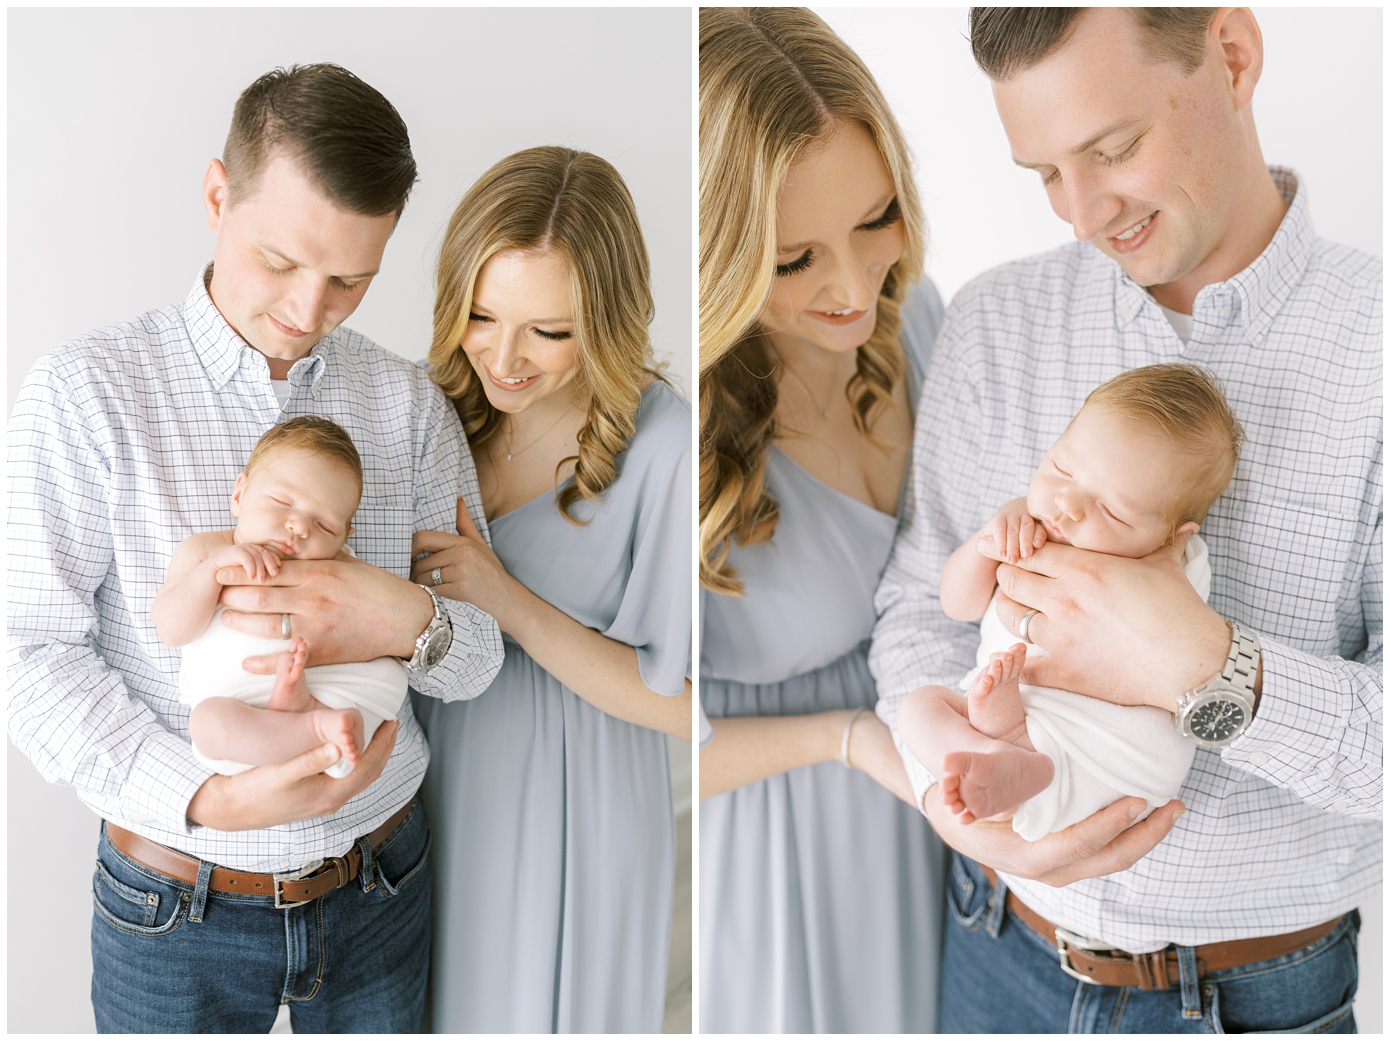 Newborn Photography in Marietta Georgia at Studio Whitlock by Lindsey Powell Photography